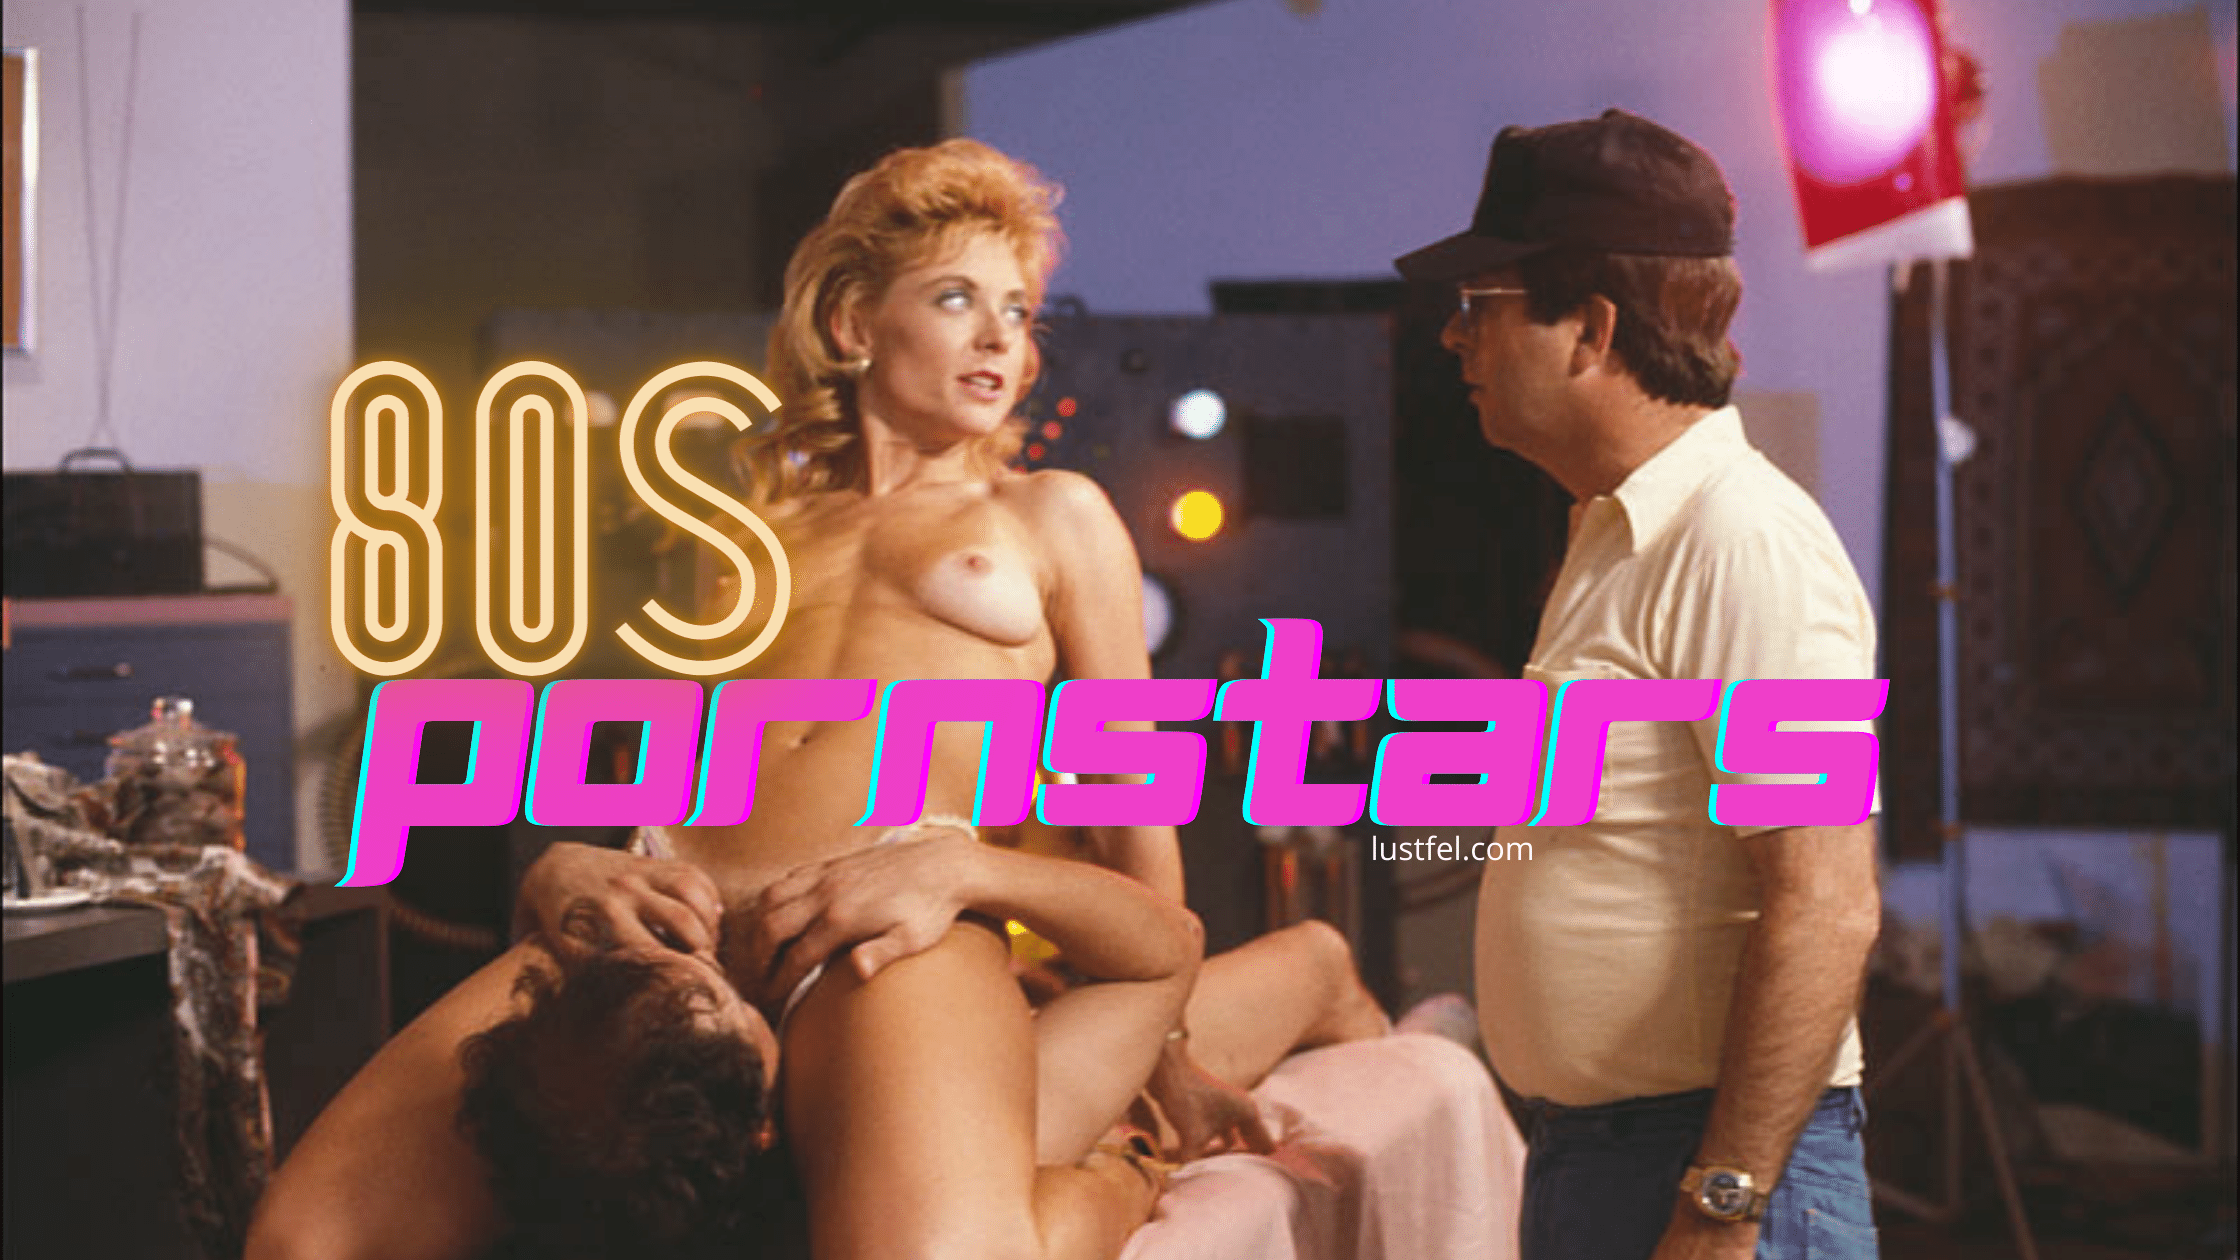 Top porn stars of the 80s